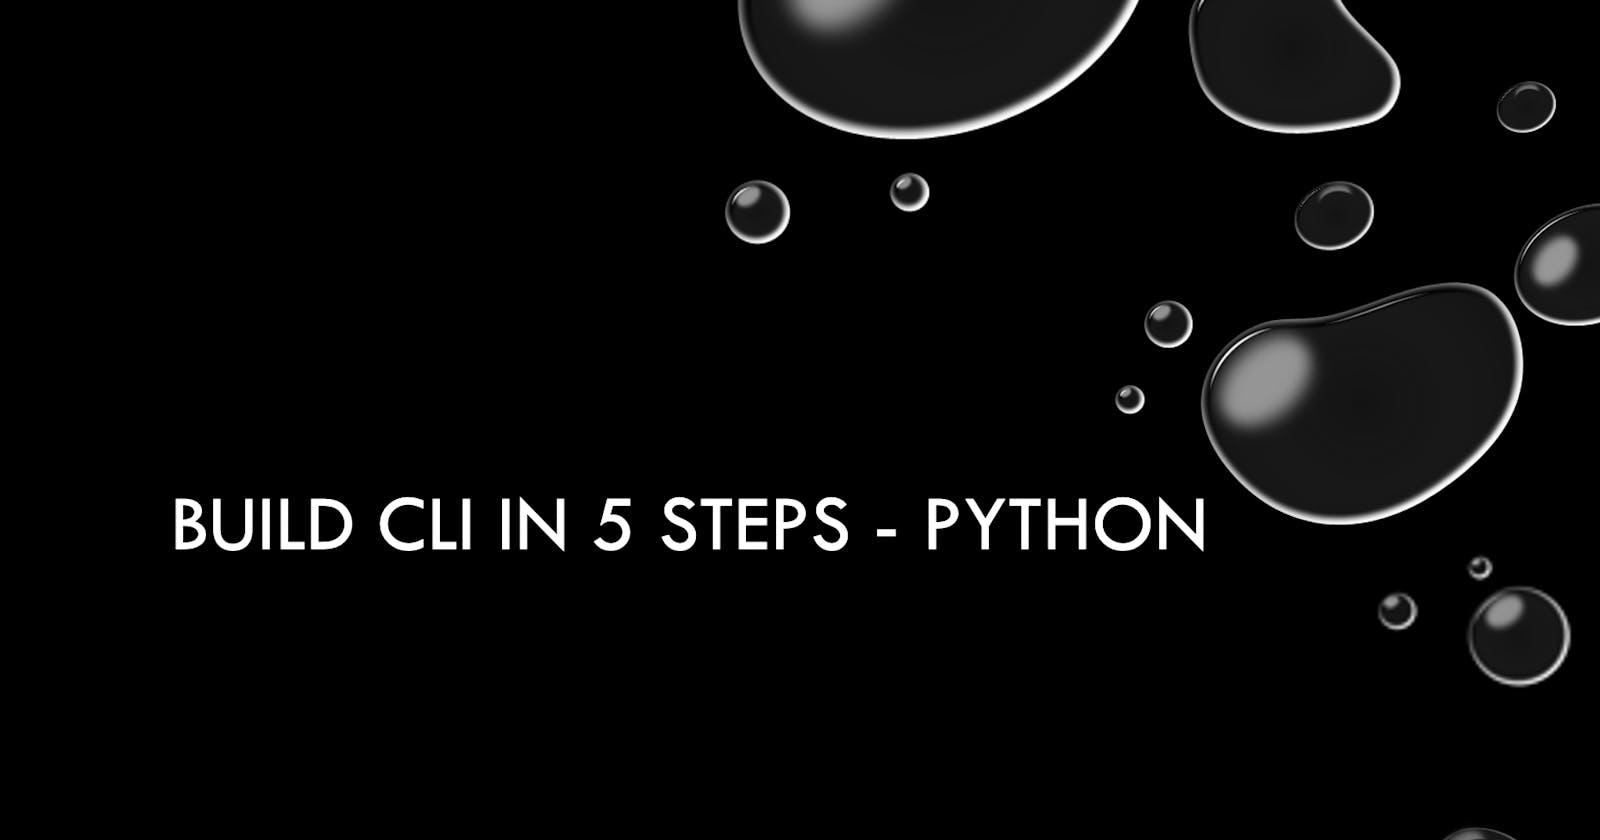 Build your first CLI with me in 5 simple steps.